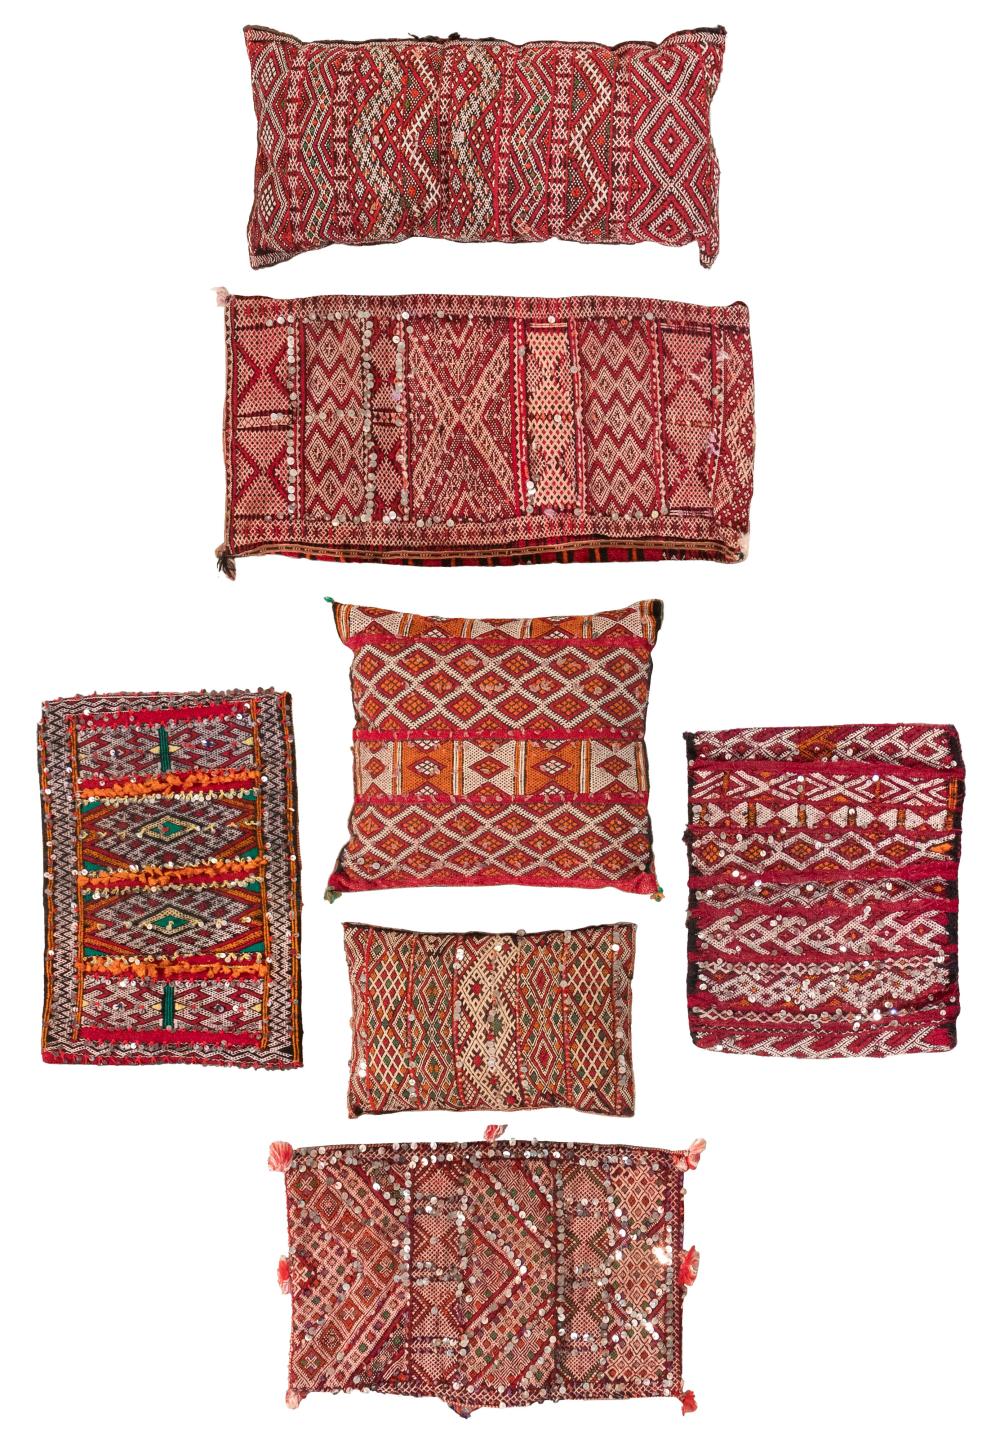 SEVEN MOROCCAN STORAGE BAGS FROM 34bdc3